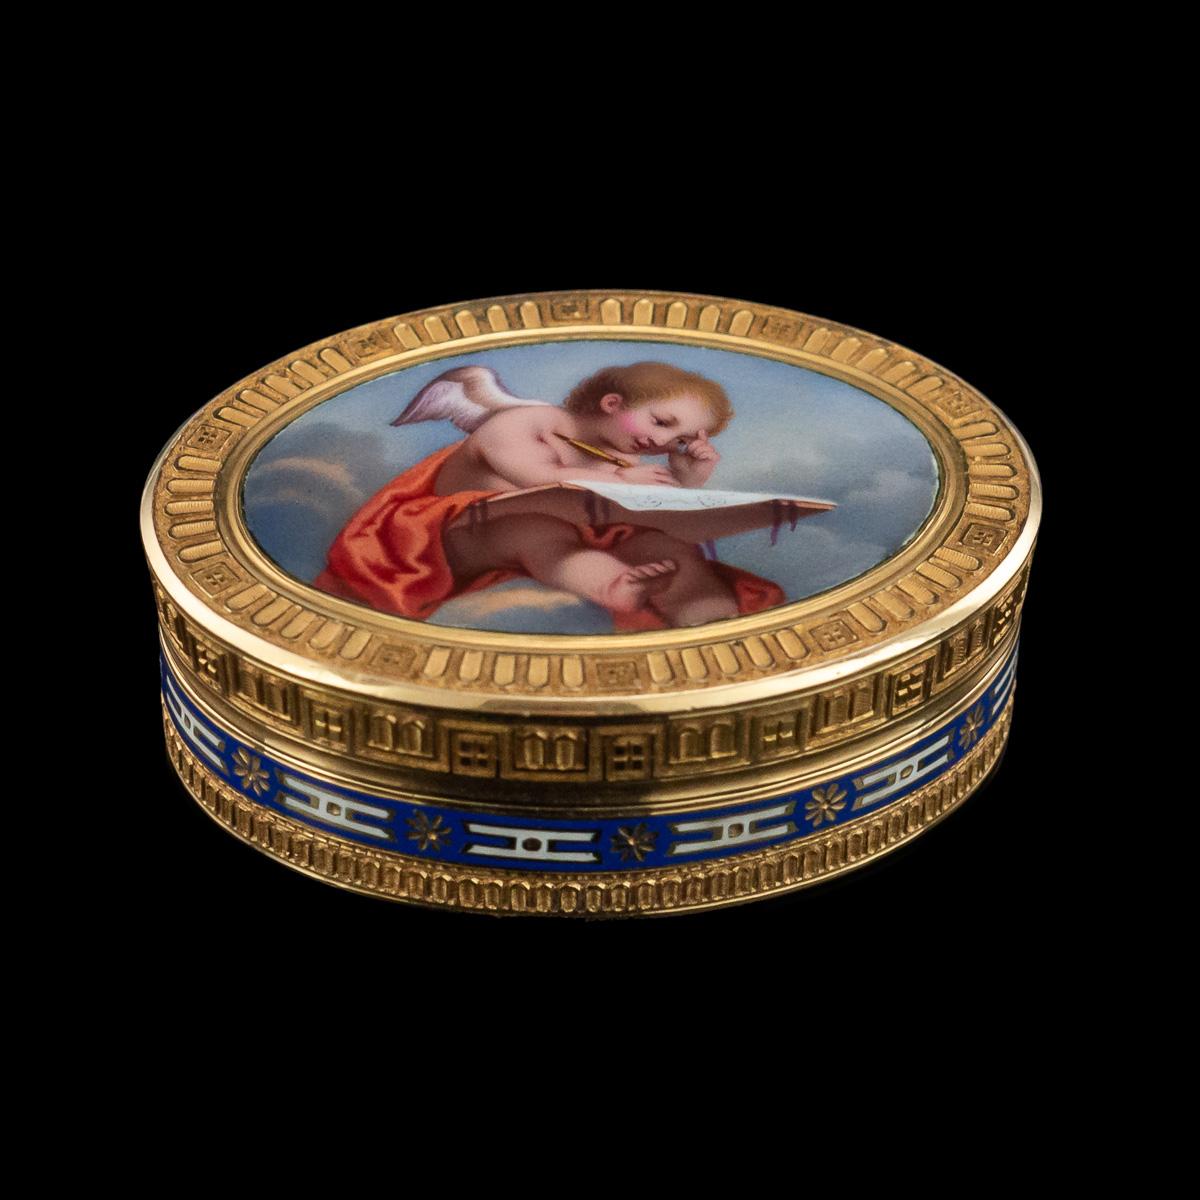 Antique early-19th century Swiss 18k gold vinaigrette, of oval shape, the lid set with an oval panel depicting a seated cherub painting, semi nude and draped in red silk amongst clouds, surrounded by a fluted boarder and enamelled underneath and